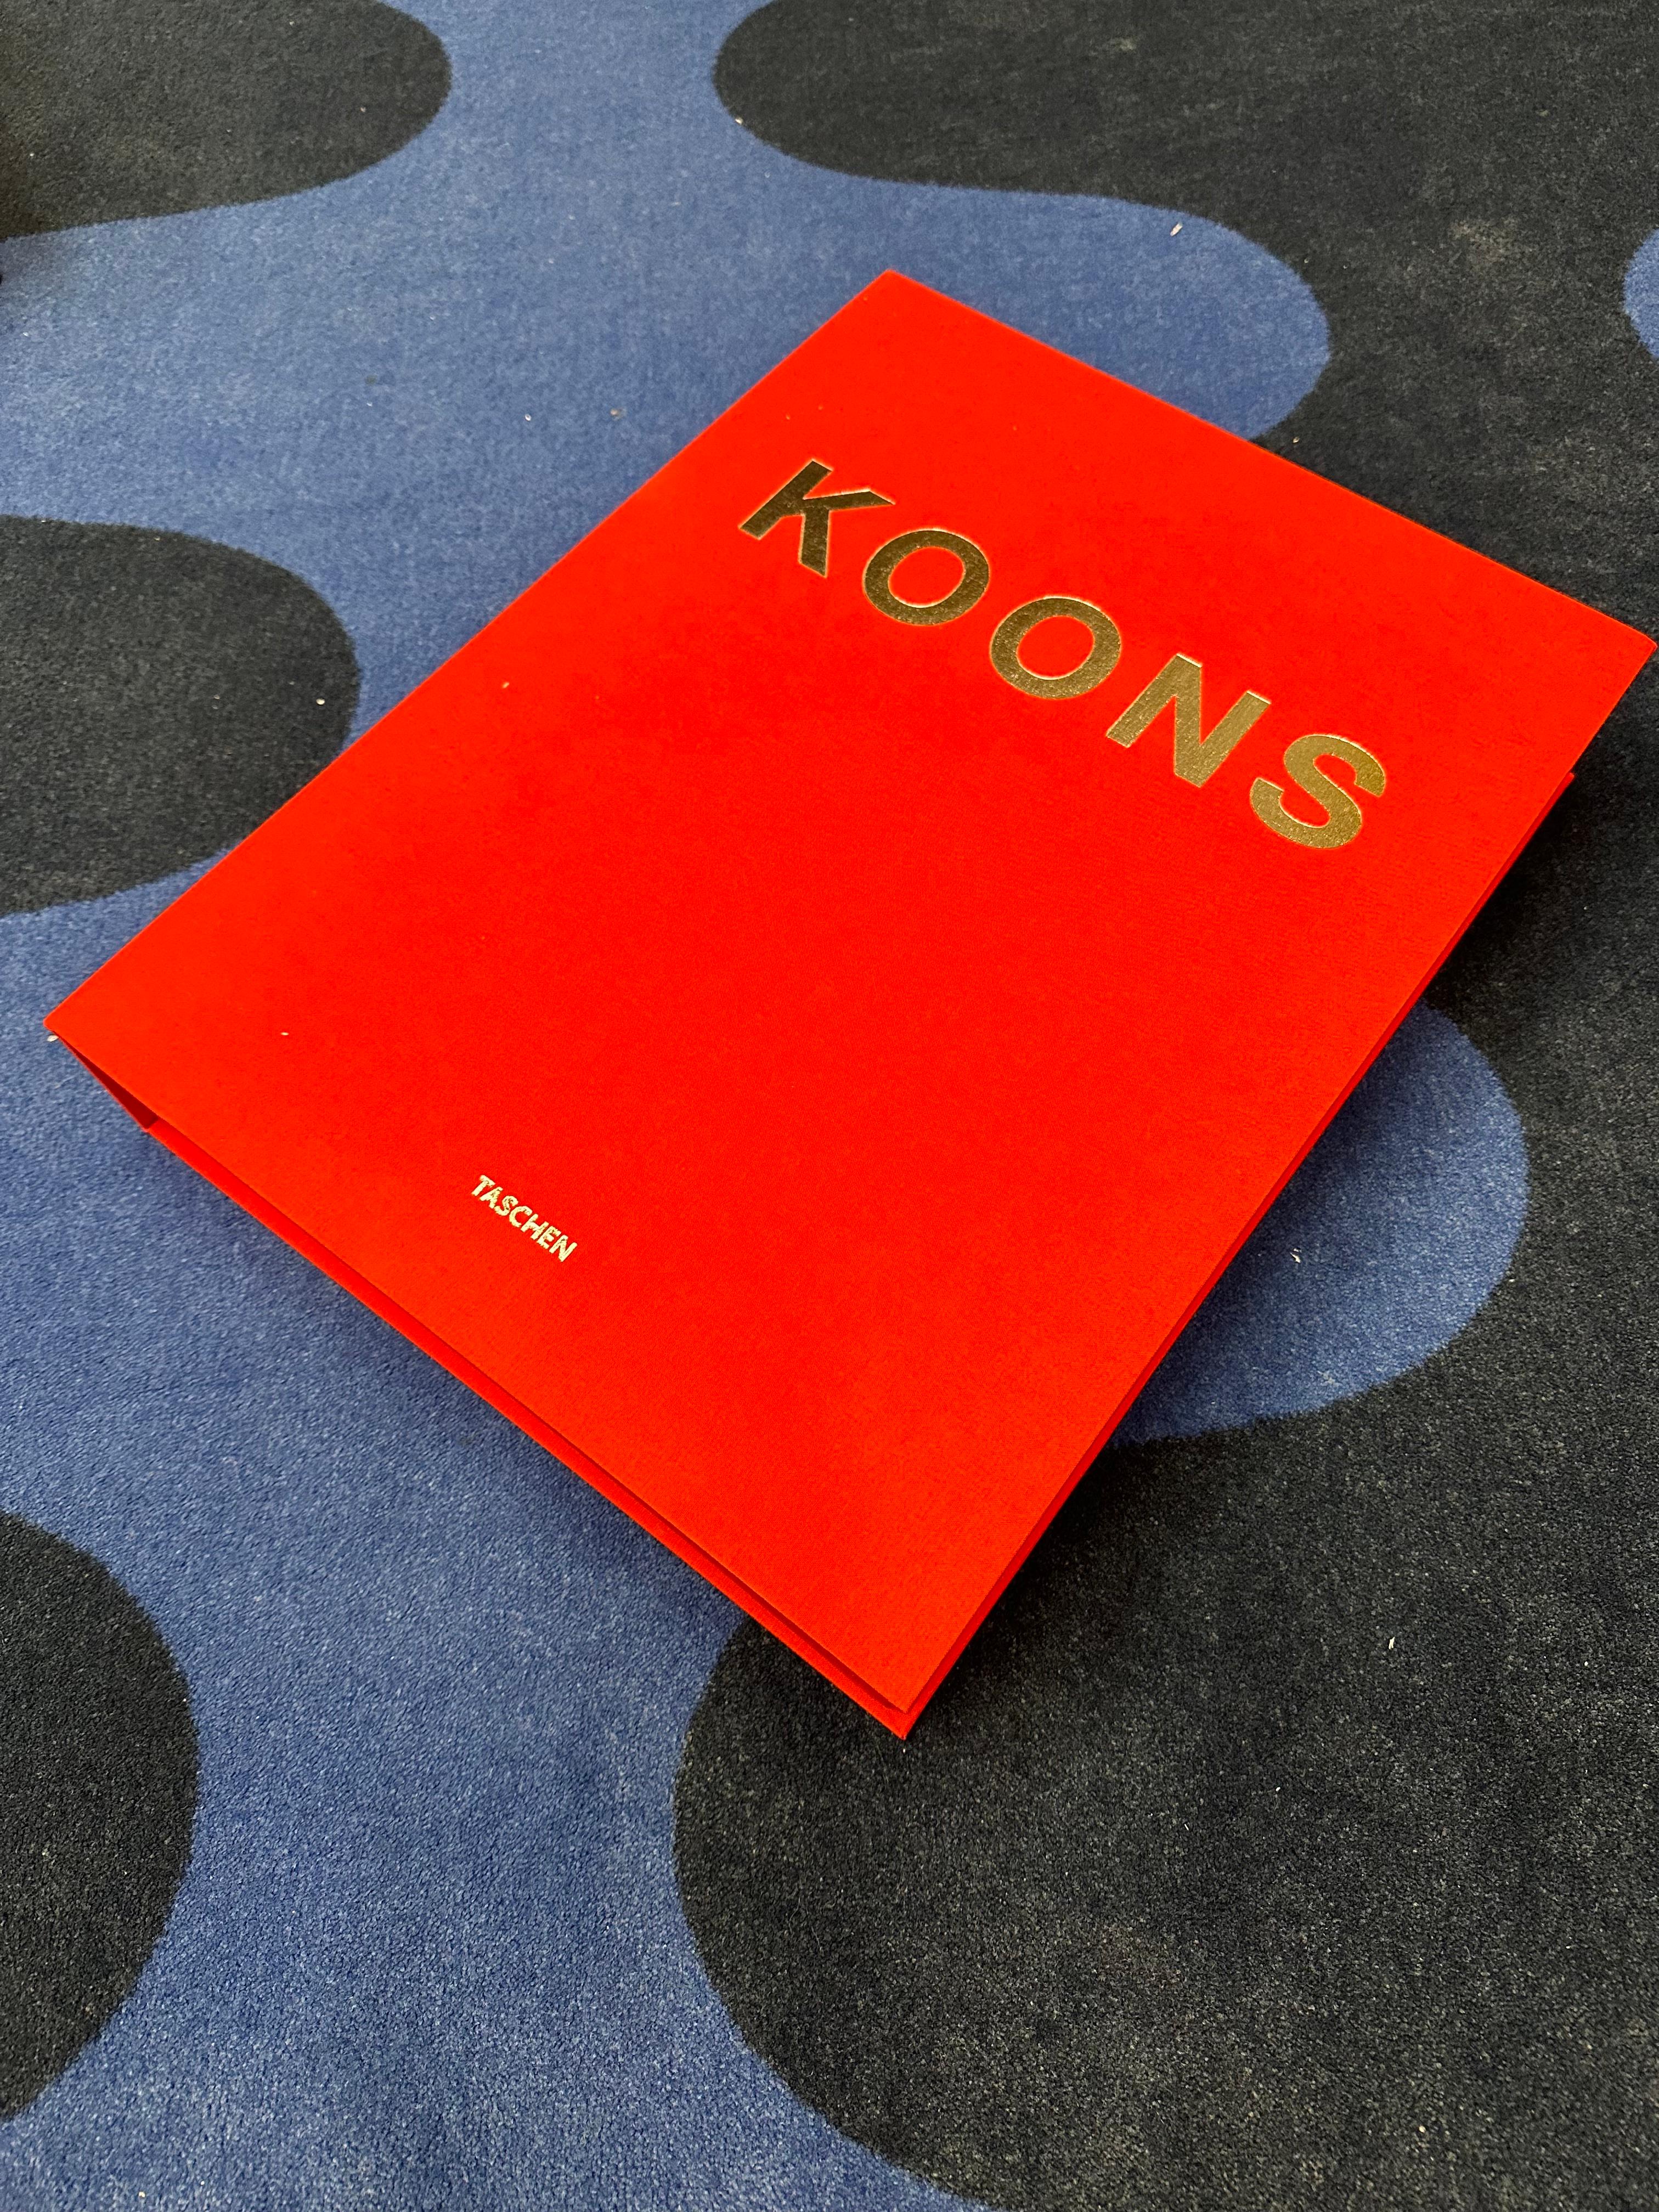 Jeff Koons Signed, Limited Edition Book, Taschen, Large Scale in Clamshell Box In Excellent Condition For Sale In PARIS, FR